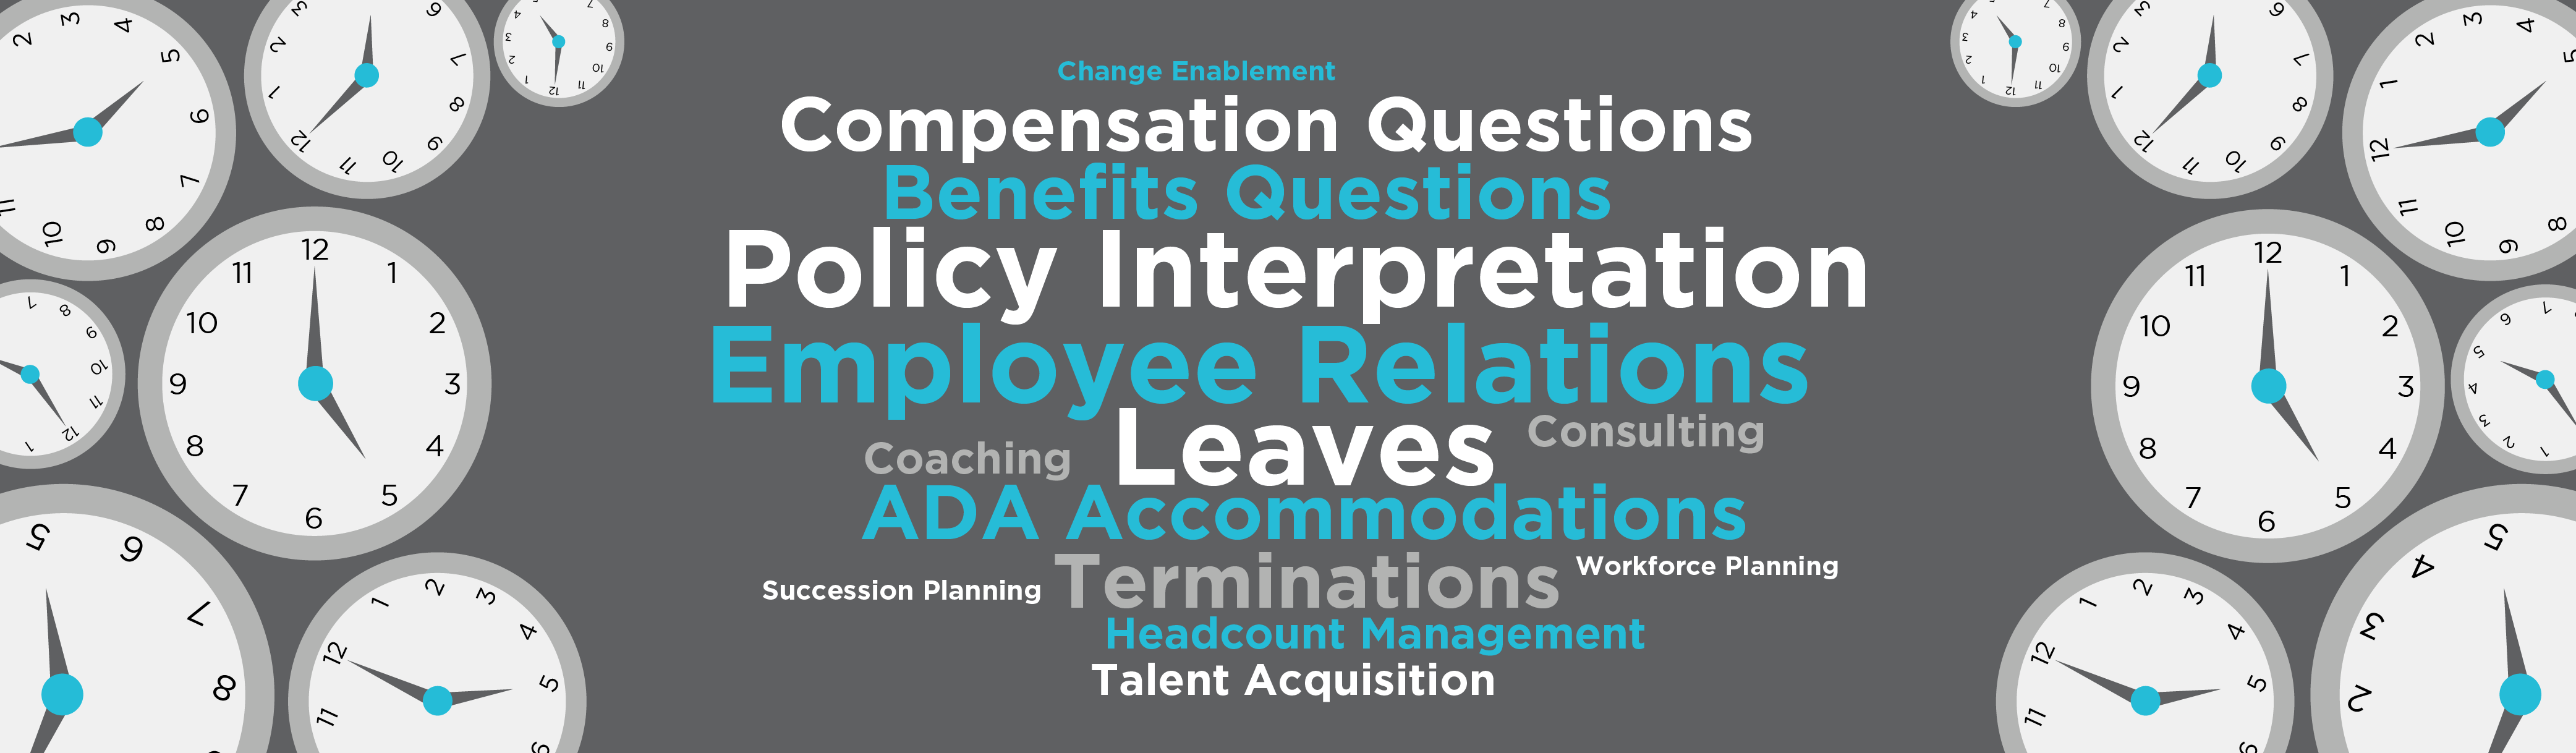 Change enablement, compensation, questions, policy, interpretation, employee relations, coaching, leaves, consulting, ada accommodations, succession planning, terminations, workforce planning, headcount management, talent acquisition